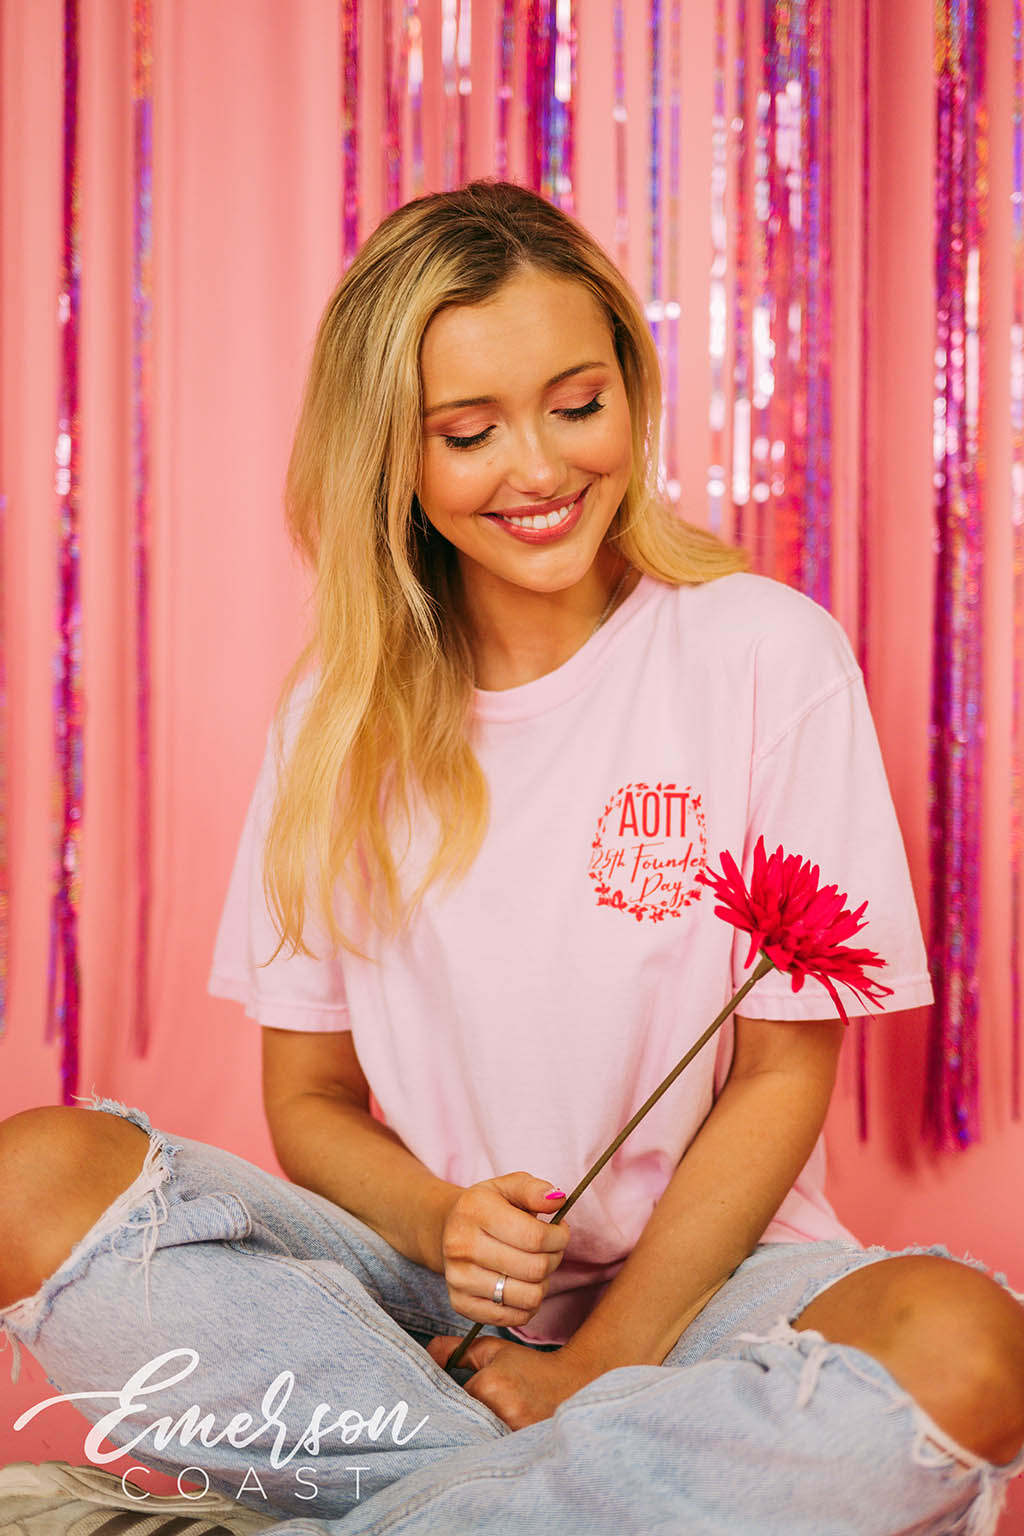 Alpha Omicron Pi Floral Founders Day Tee